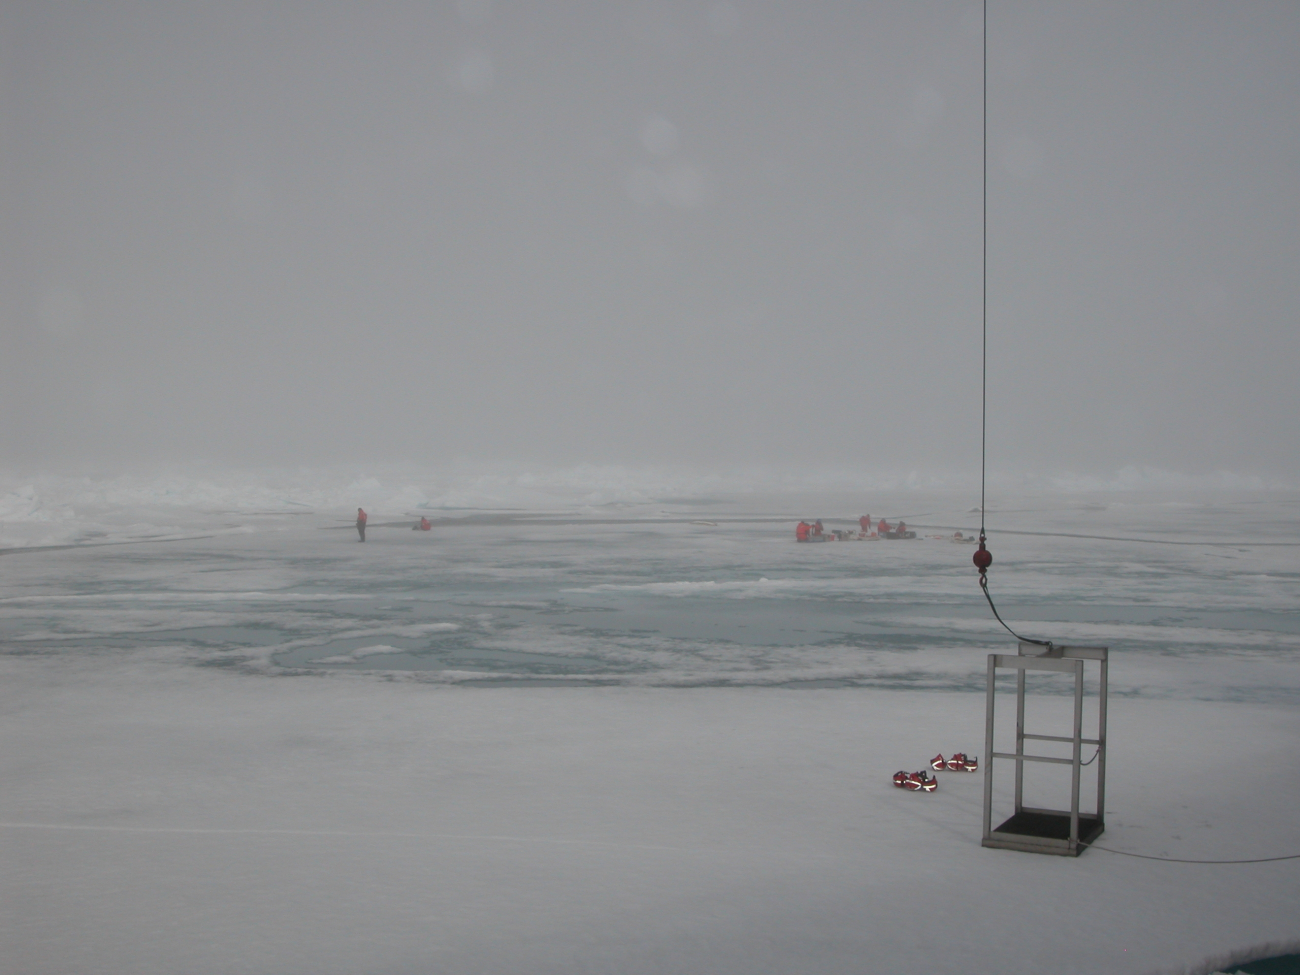 Scientists work on the ice in foggy weather